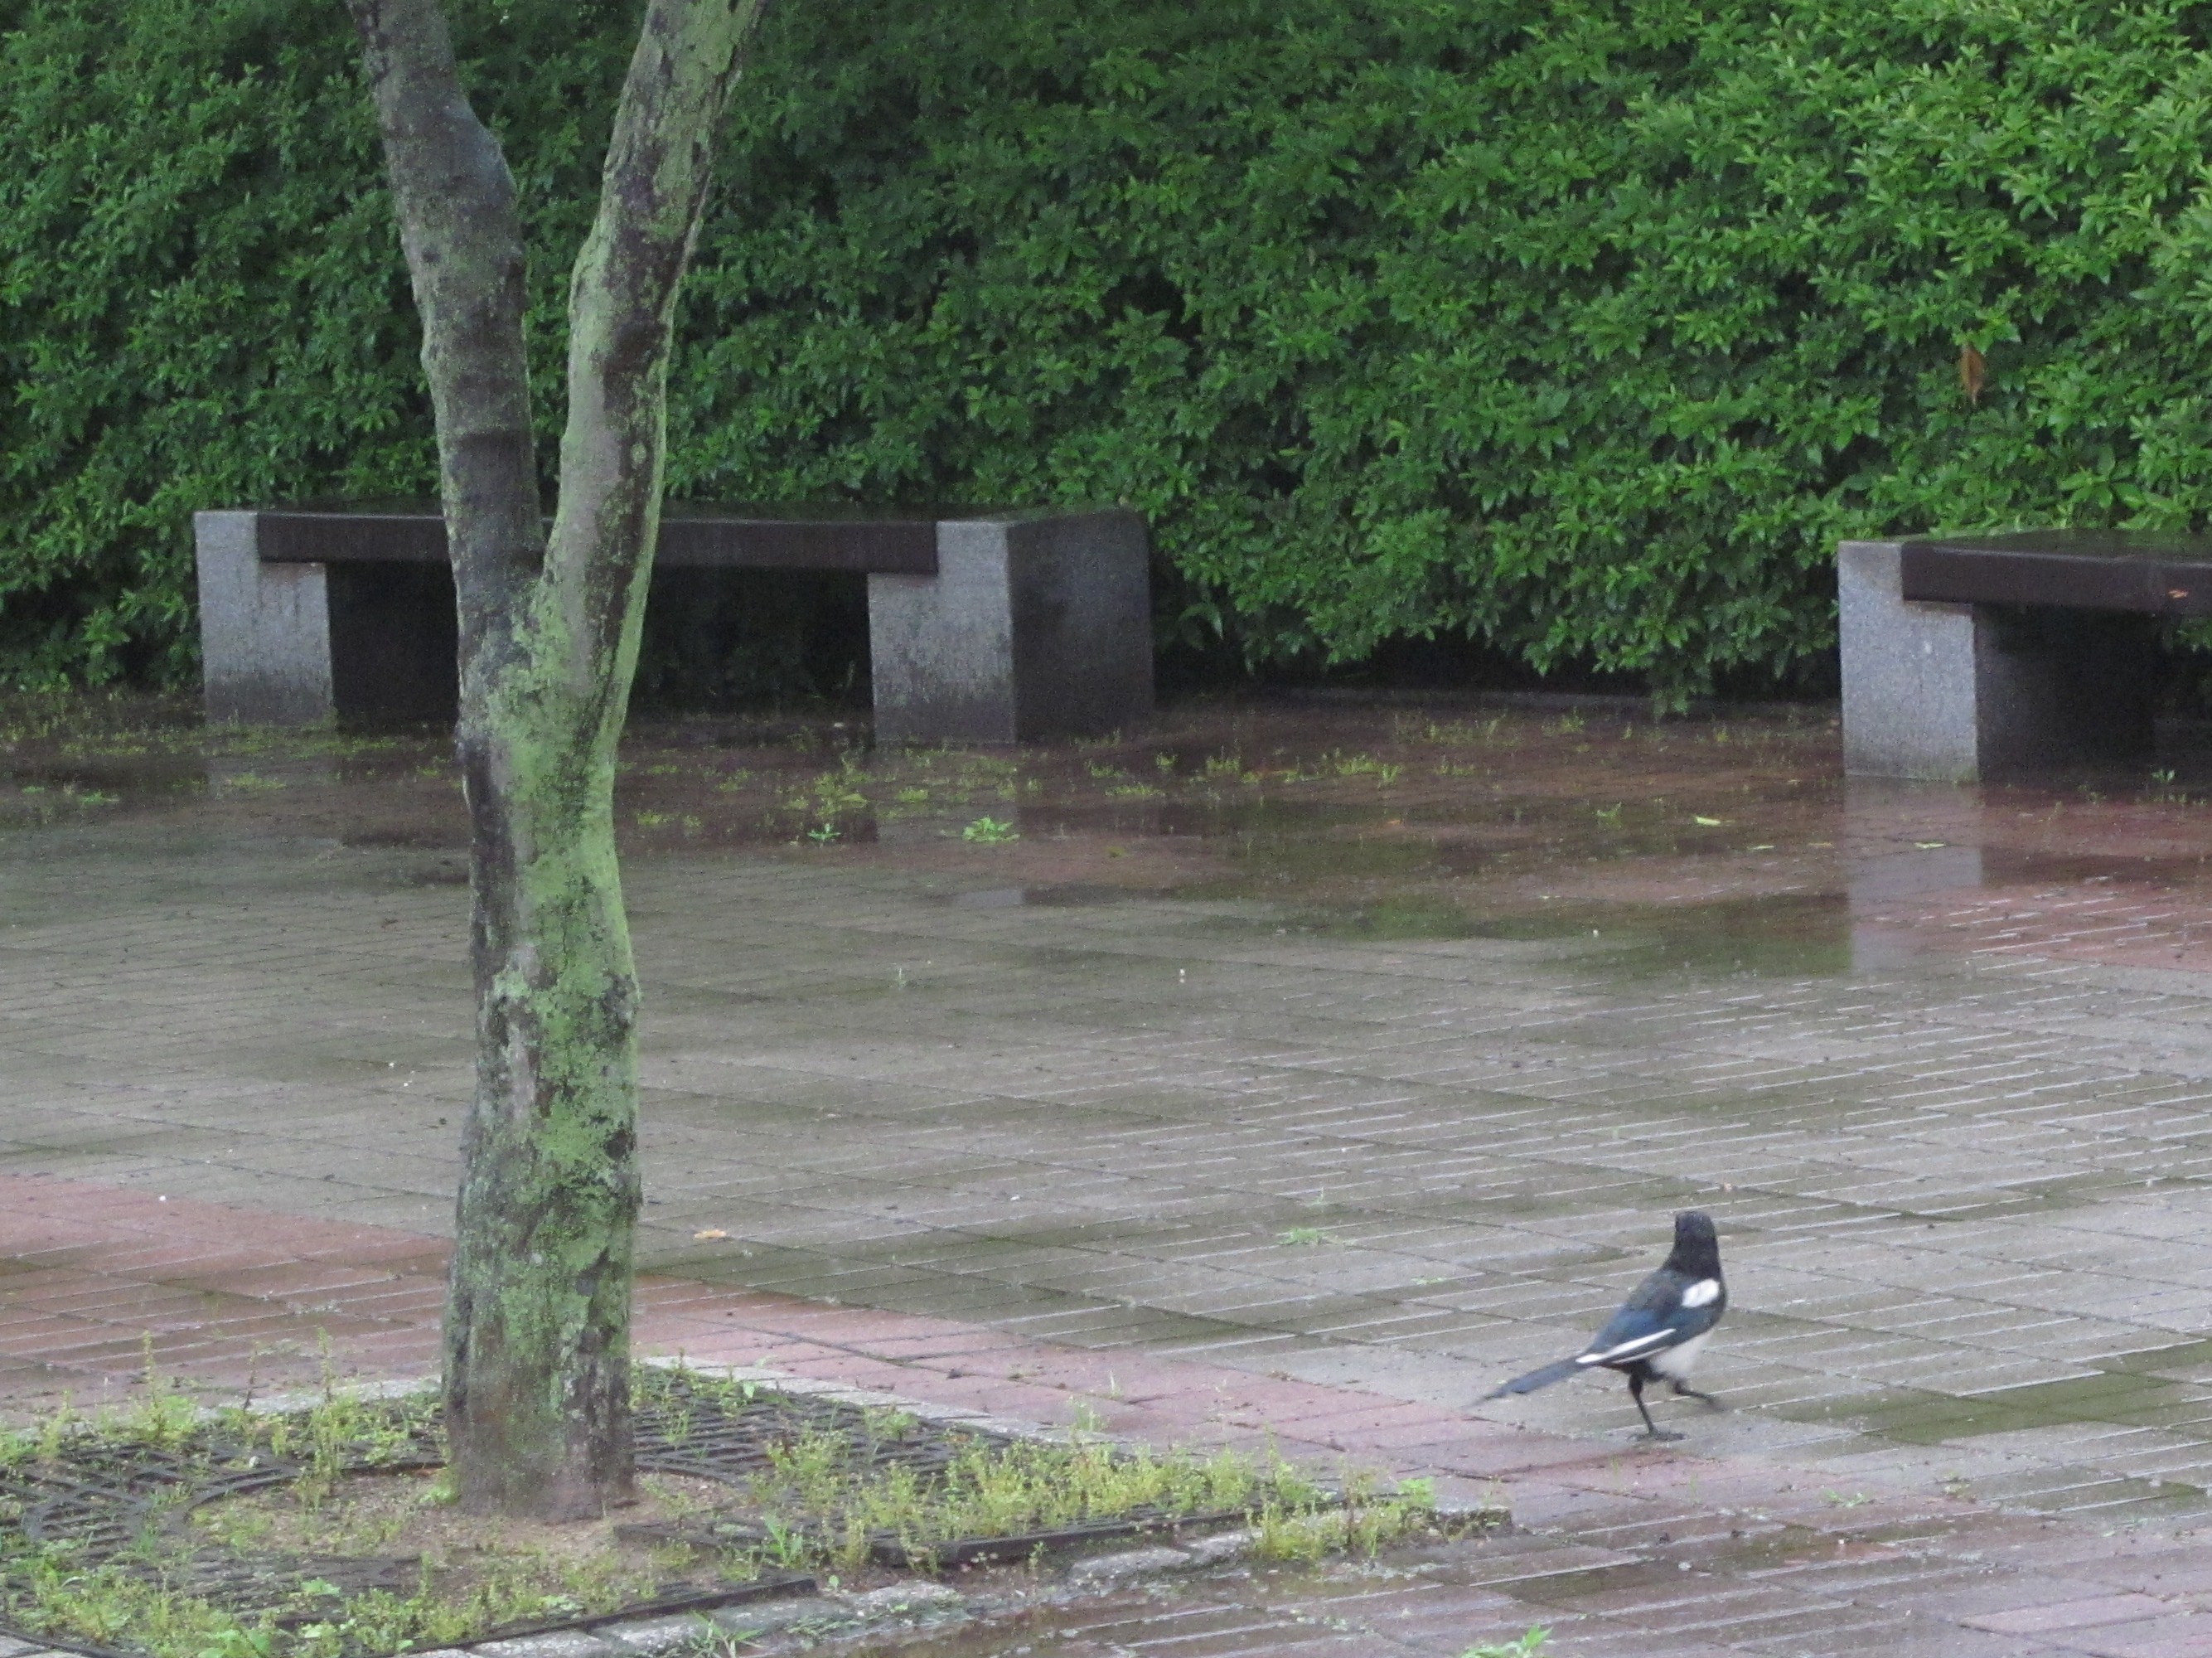 A rainy sidewalk area with a tree trunk and a magpie